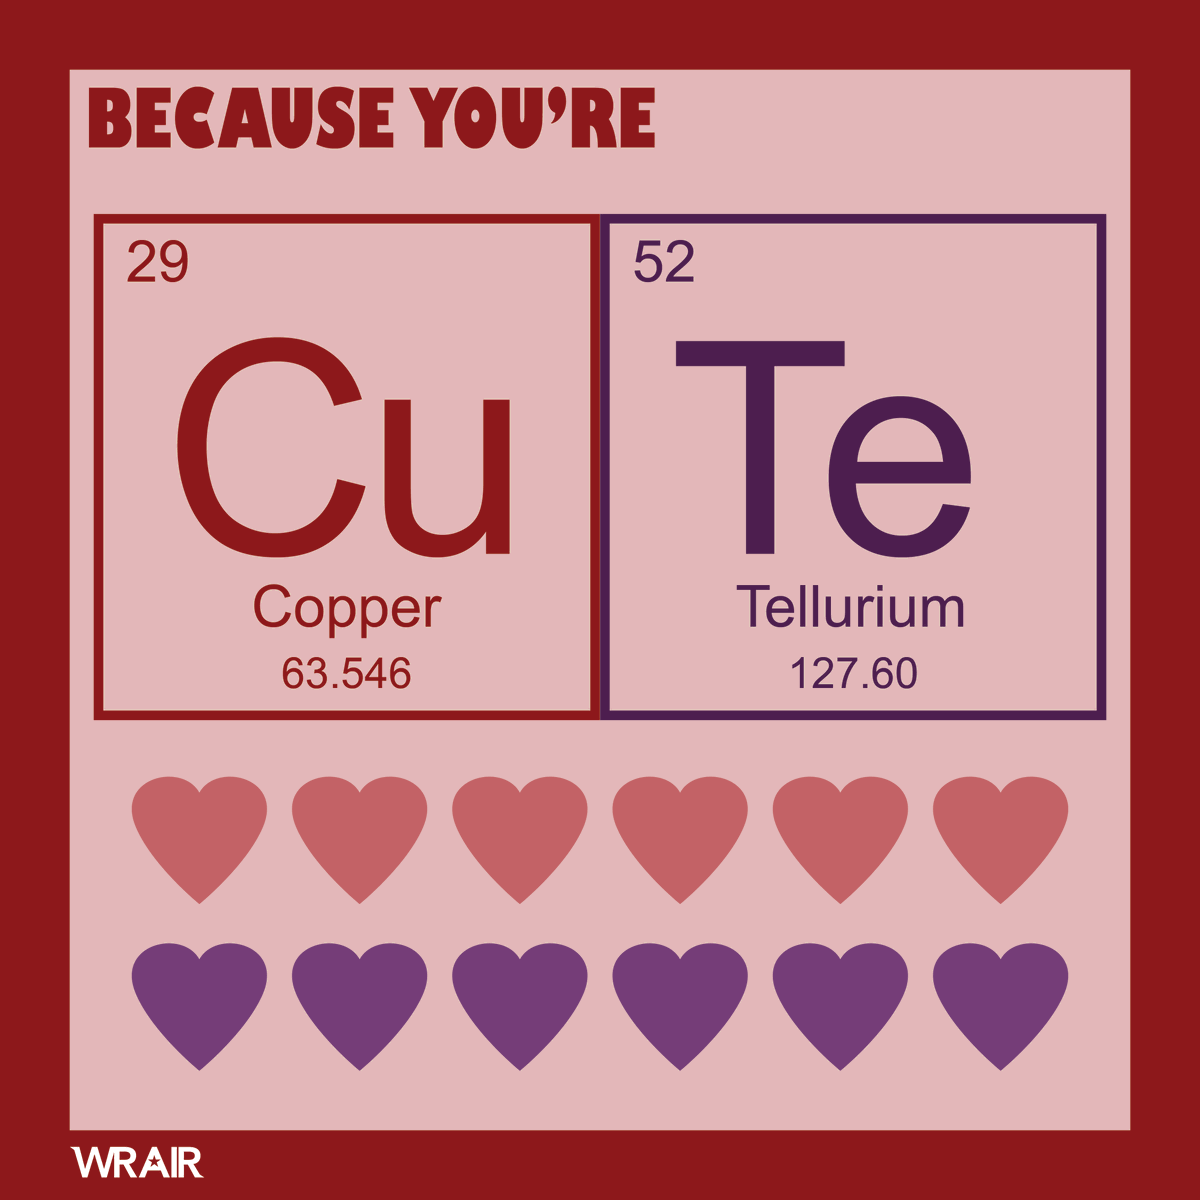 To our researchers and support staff making science happen every day, Happy Valentine's Day. <3